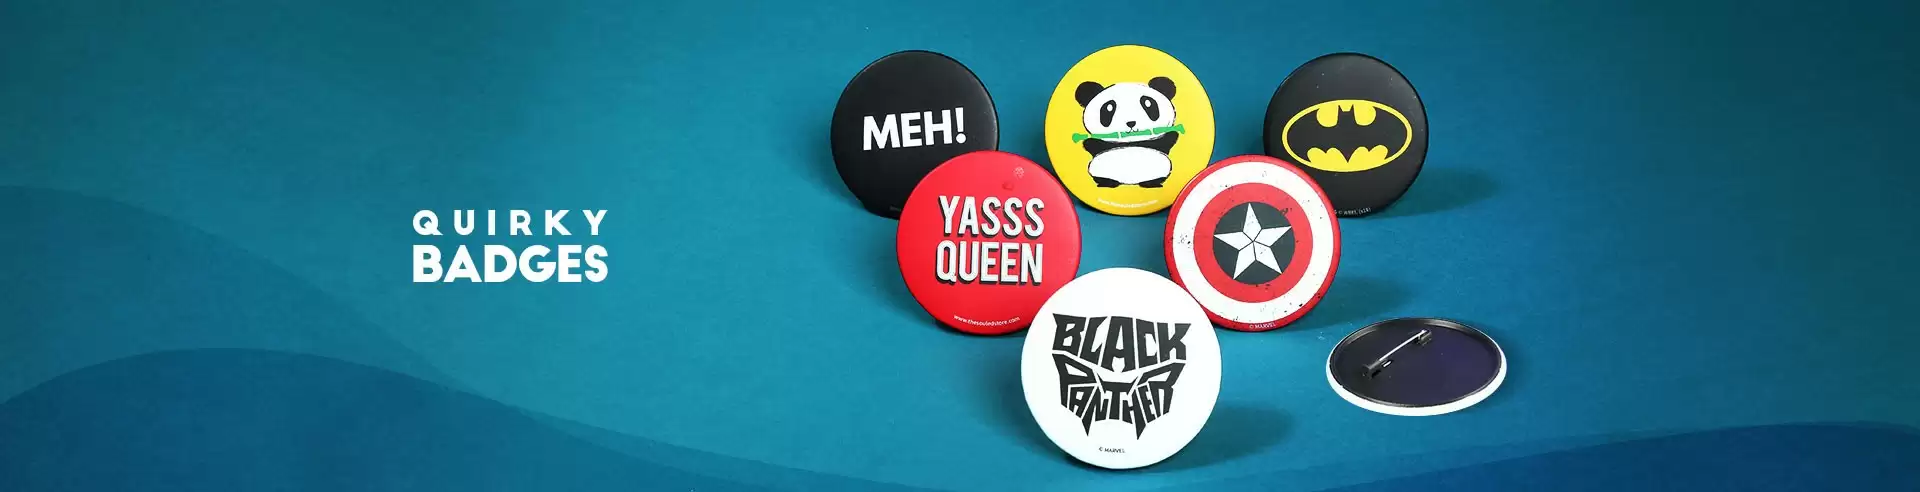 Enjoy Flat Rs. 50 Off On Purchase Of 5 Badges With This Discount Coupon At Thesouledstore